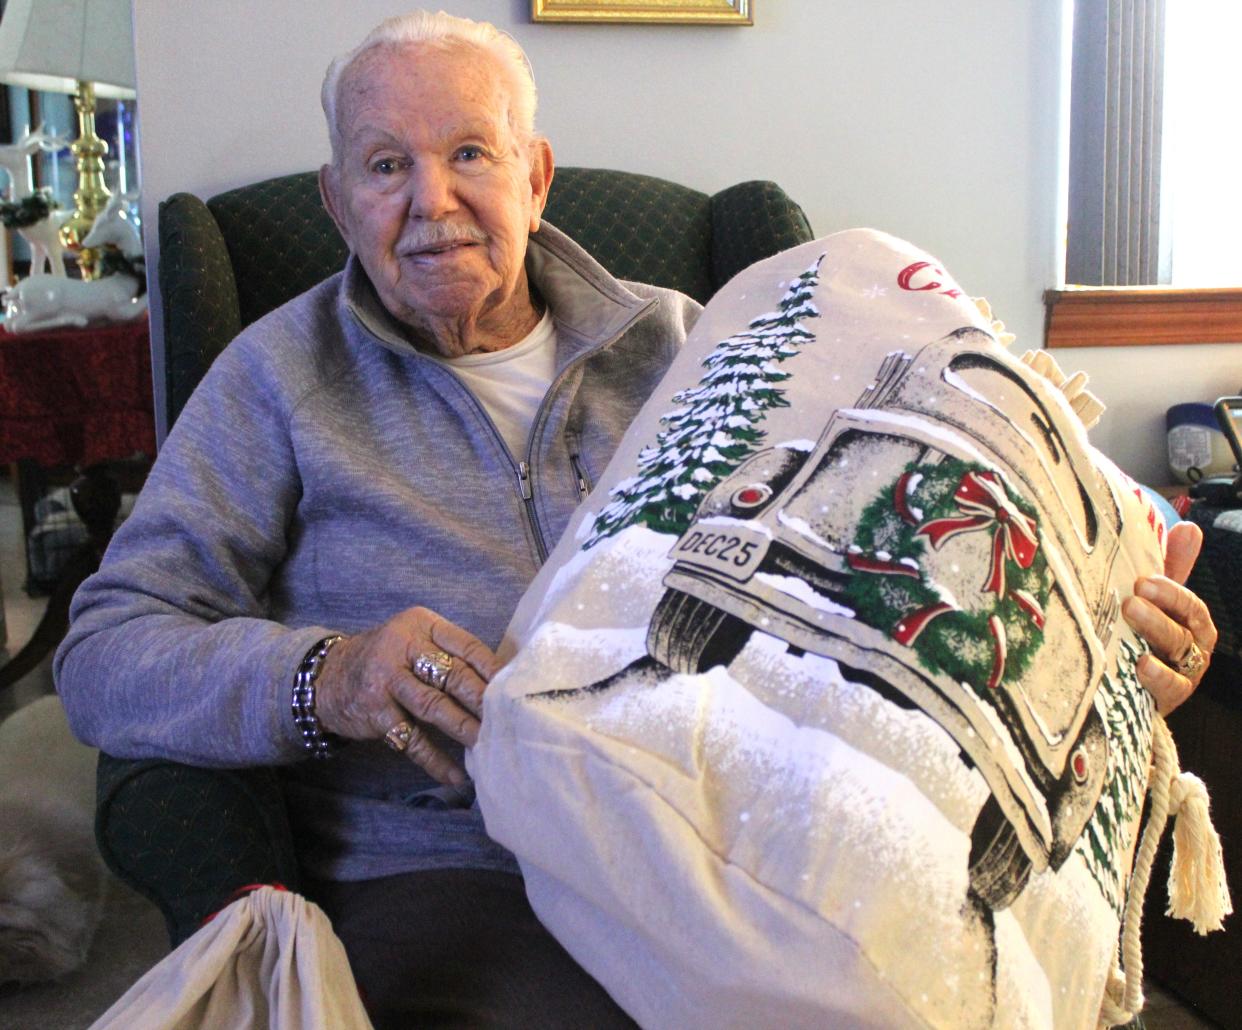 Emil Skinlo holds one of the gift bags he received from Angels 4 Vets. The 90-year-old veteran served in the Air Force for 27 years.